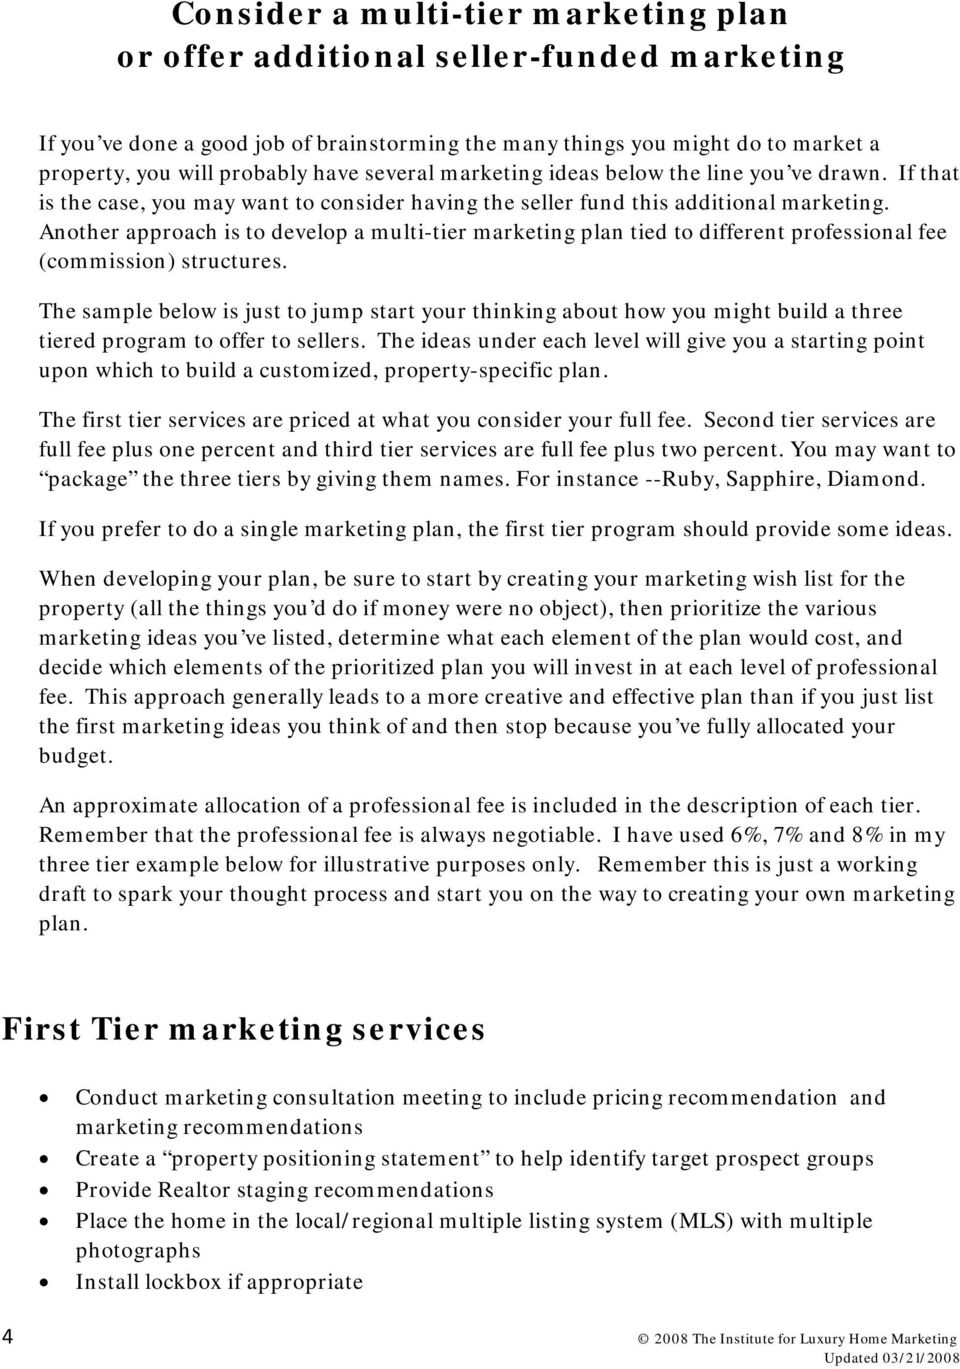 Another approach is to develop a multi-tier marketing plan tied to different professional fee (commission) structures.